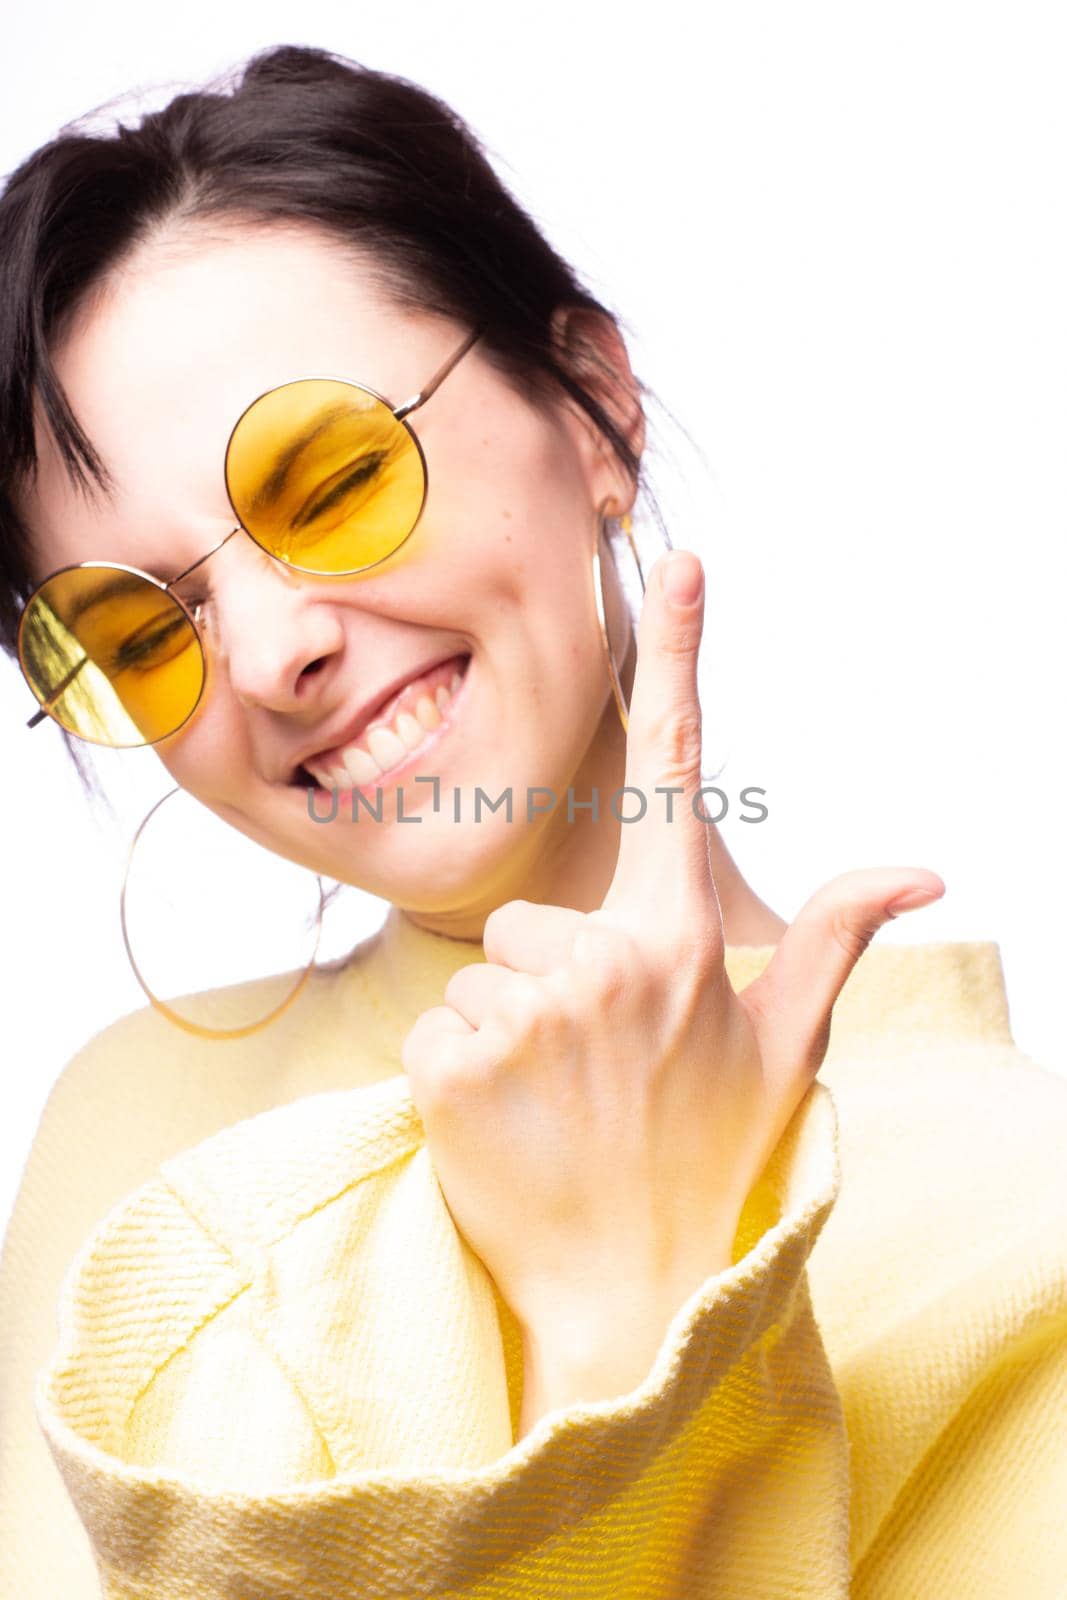 brunette woman in yellow glasses and yellow sweater, close-up portrait, white background by shilovskaya